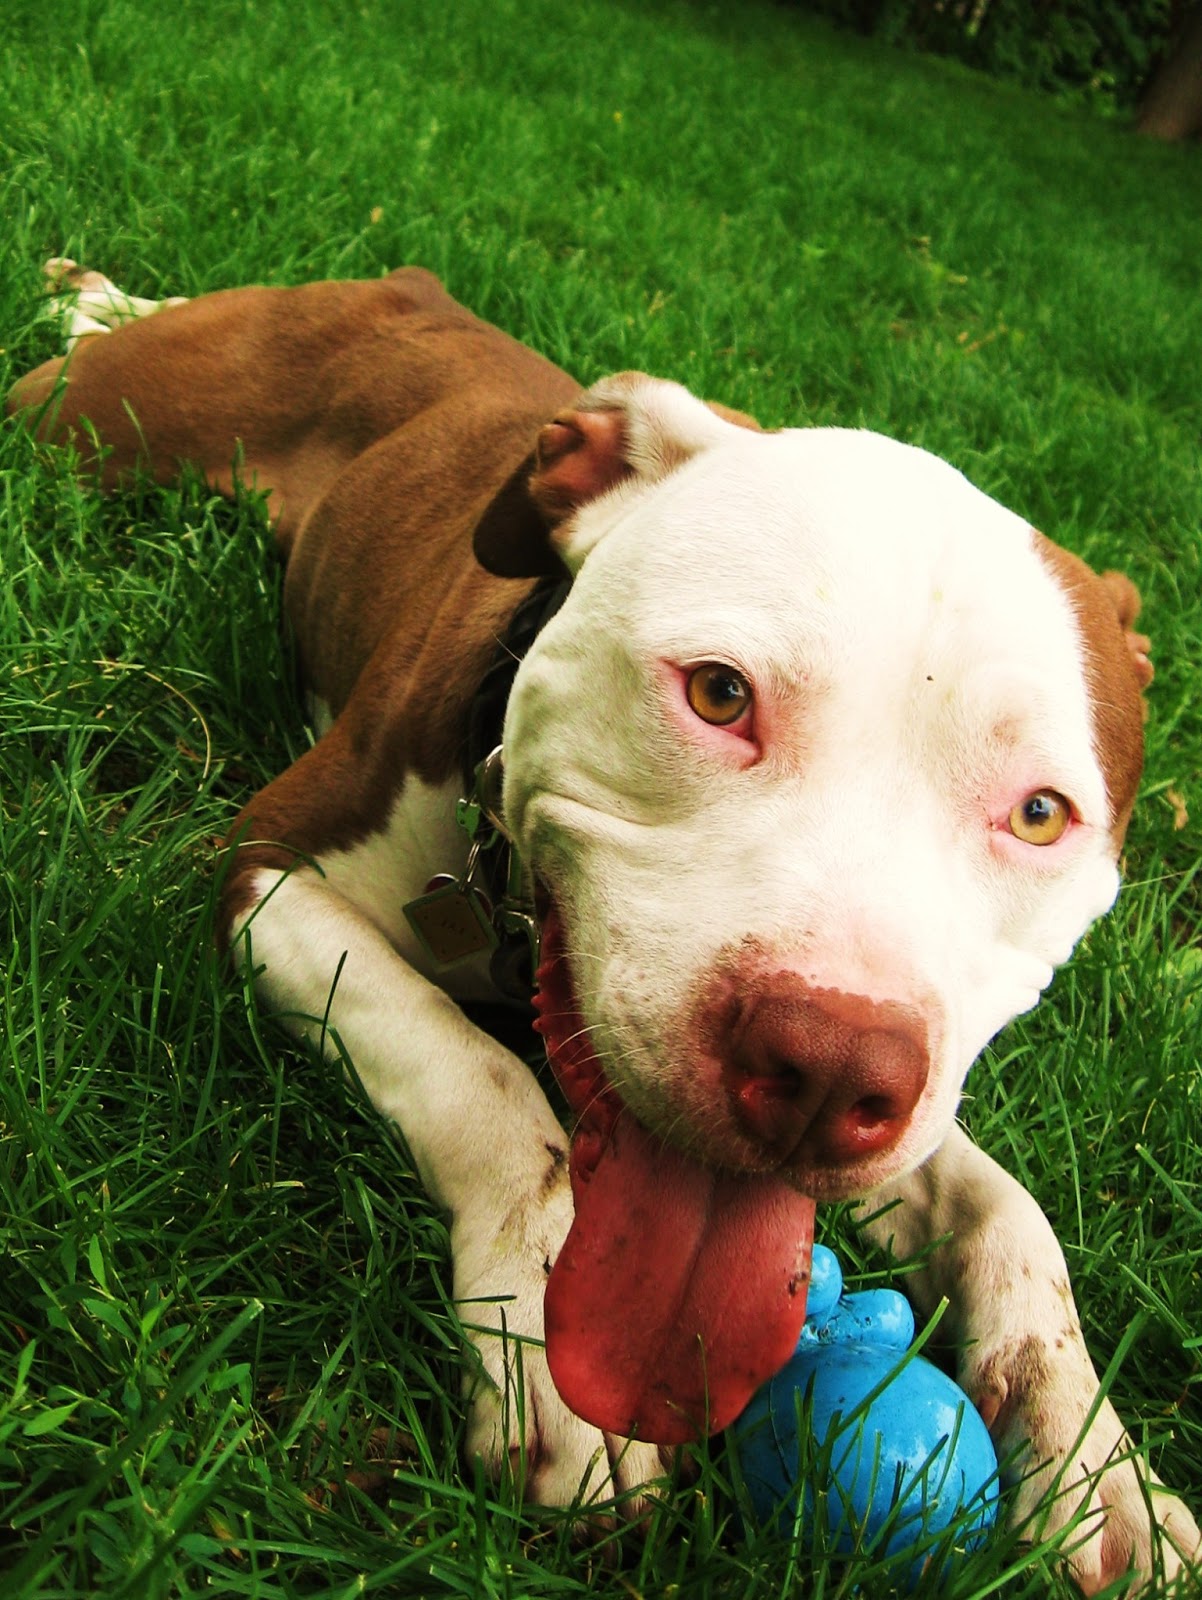 Source URL: http://kootation.com/what-is-a-pit-bull-happy.html